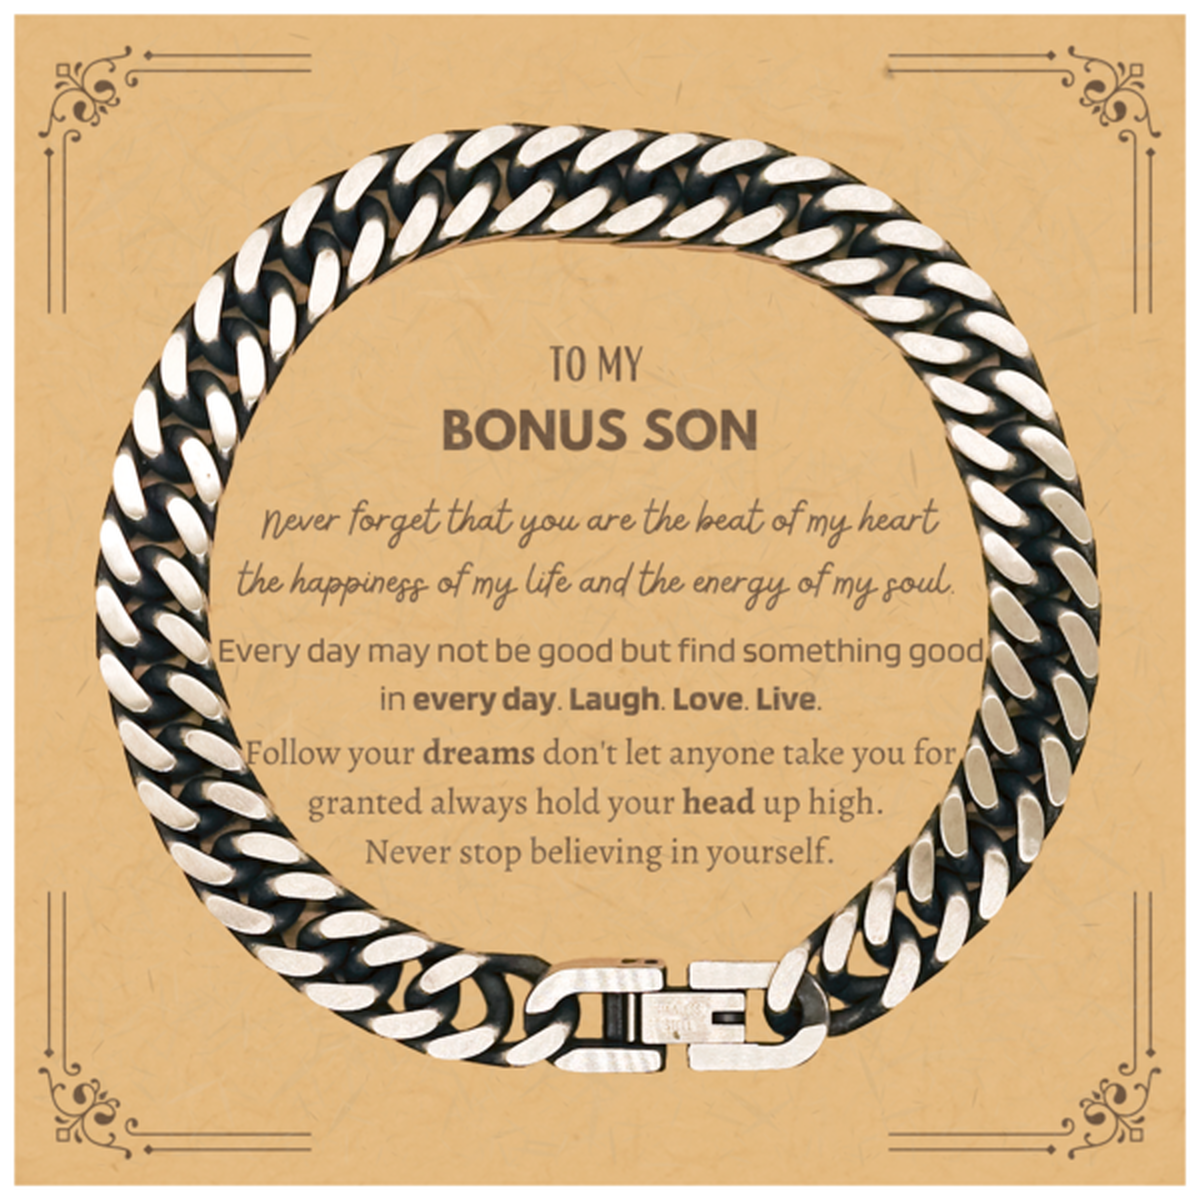 To My Bonus Son Message Card Gifts, Christmas Bonus Son Cuban Link Chain Bracelet Present, Birthday Unique Motivational For Bonus Son, To My Bonus Son Never forget that you are the beat of my heart the happiness of my life and the energy of my soul